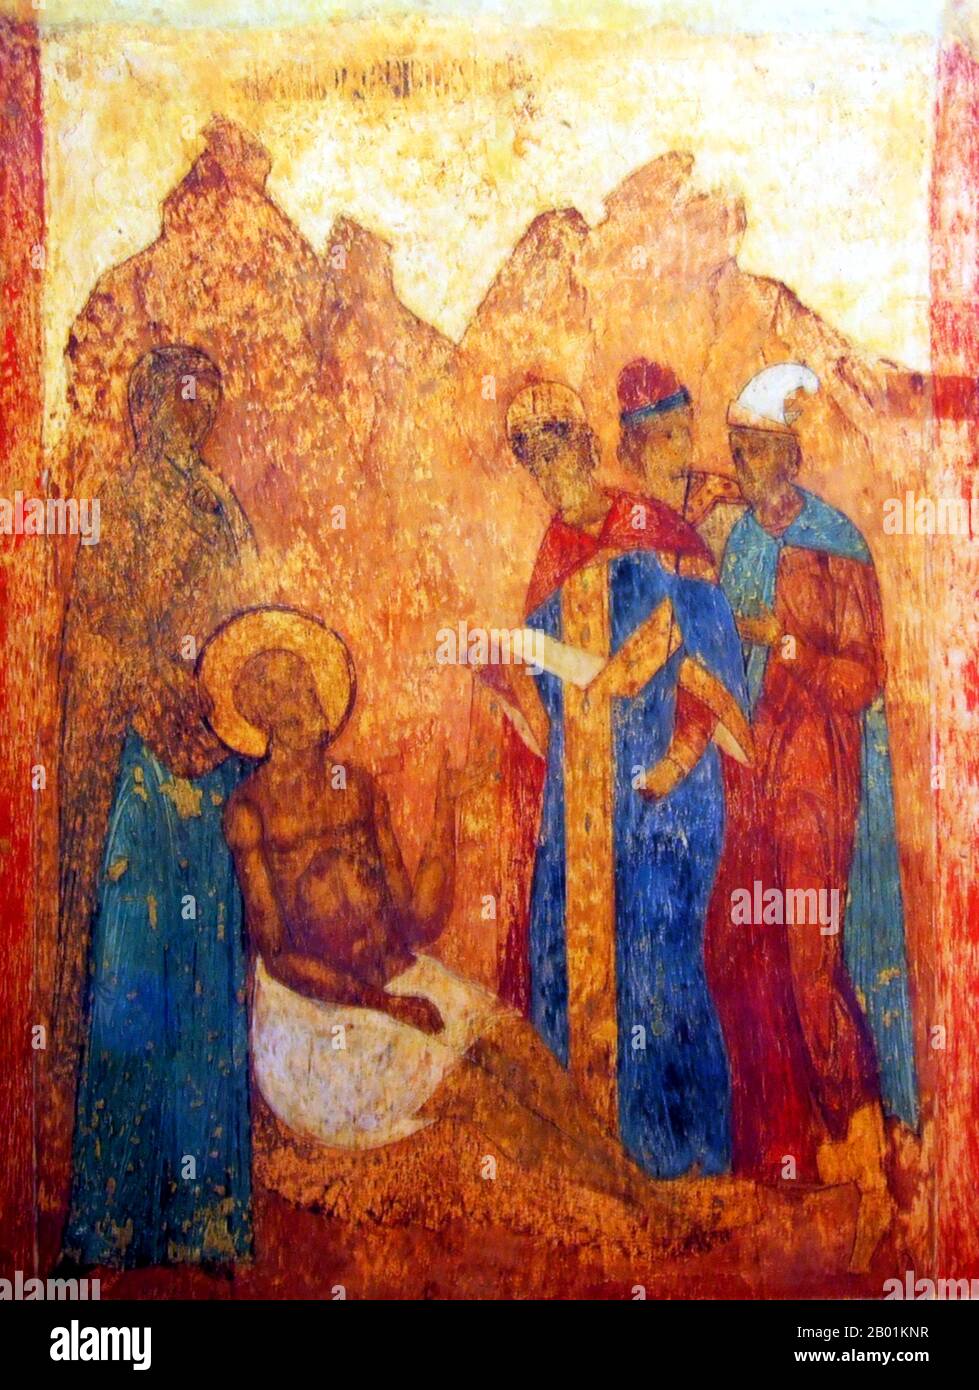 Russia: Job with a halo alongside his friends. Fresco on the southwest wall of the Cathedral of the Annunciation, Moscow, 1547-1551.  Job is the central character of the Book of Job in the Hebrew Bible. Job is also recognised as a prophet of God in the Qur'an.  The Book of Job begins with an introduction to Job's character. He is described as a blessed man who lives righteously. God's praise of Job prompts Satan to challenge Job's integrity and suggesting that Job serves God simply because he protects him. God removes Job's protection, allowing Satan to take his wealth, his children and more. Stock Photo